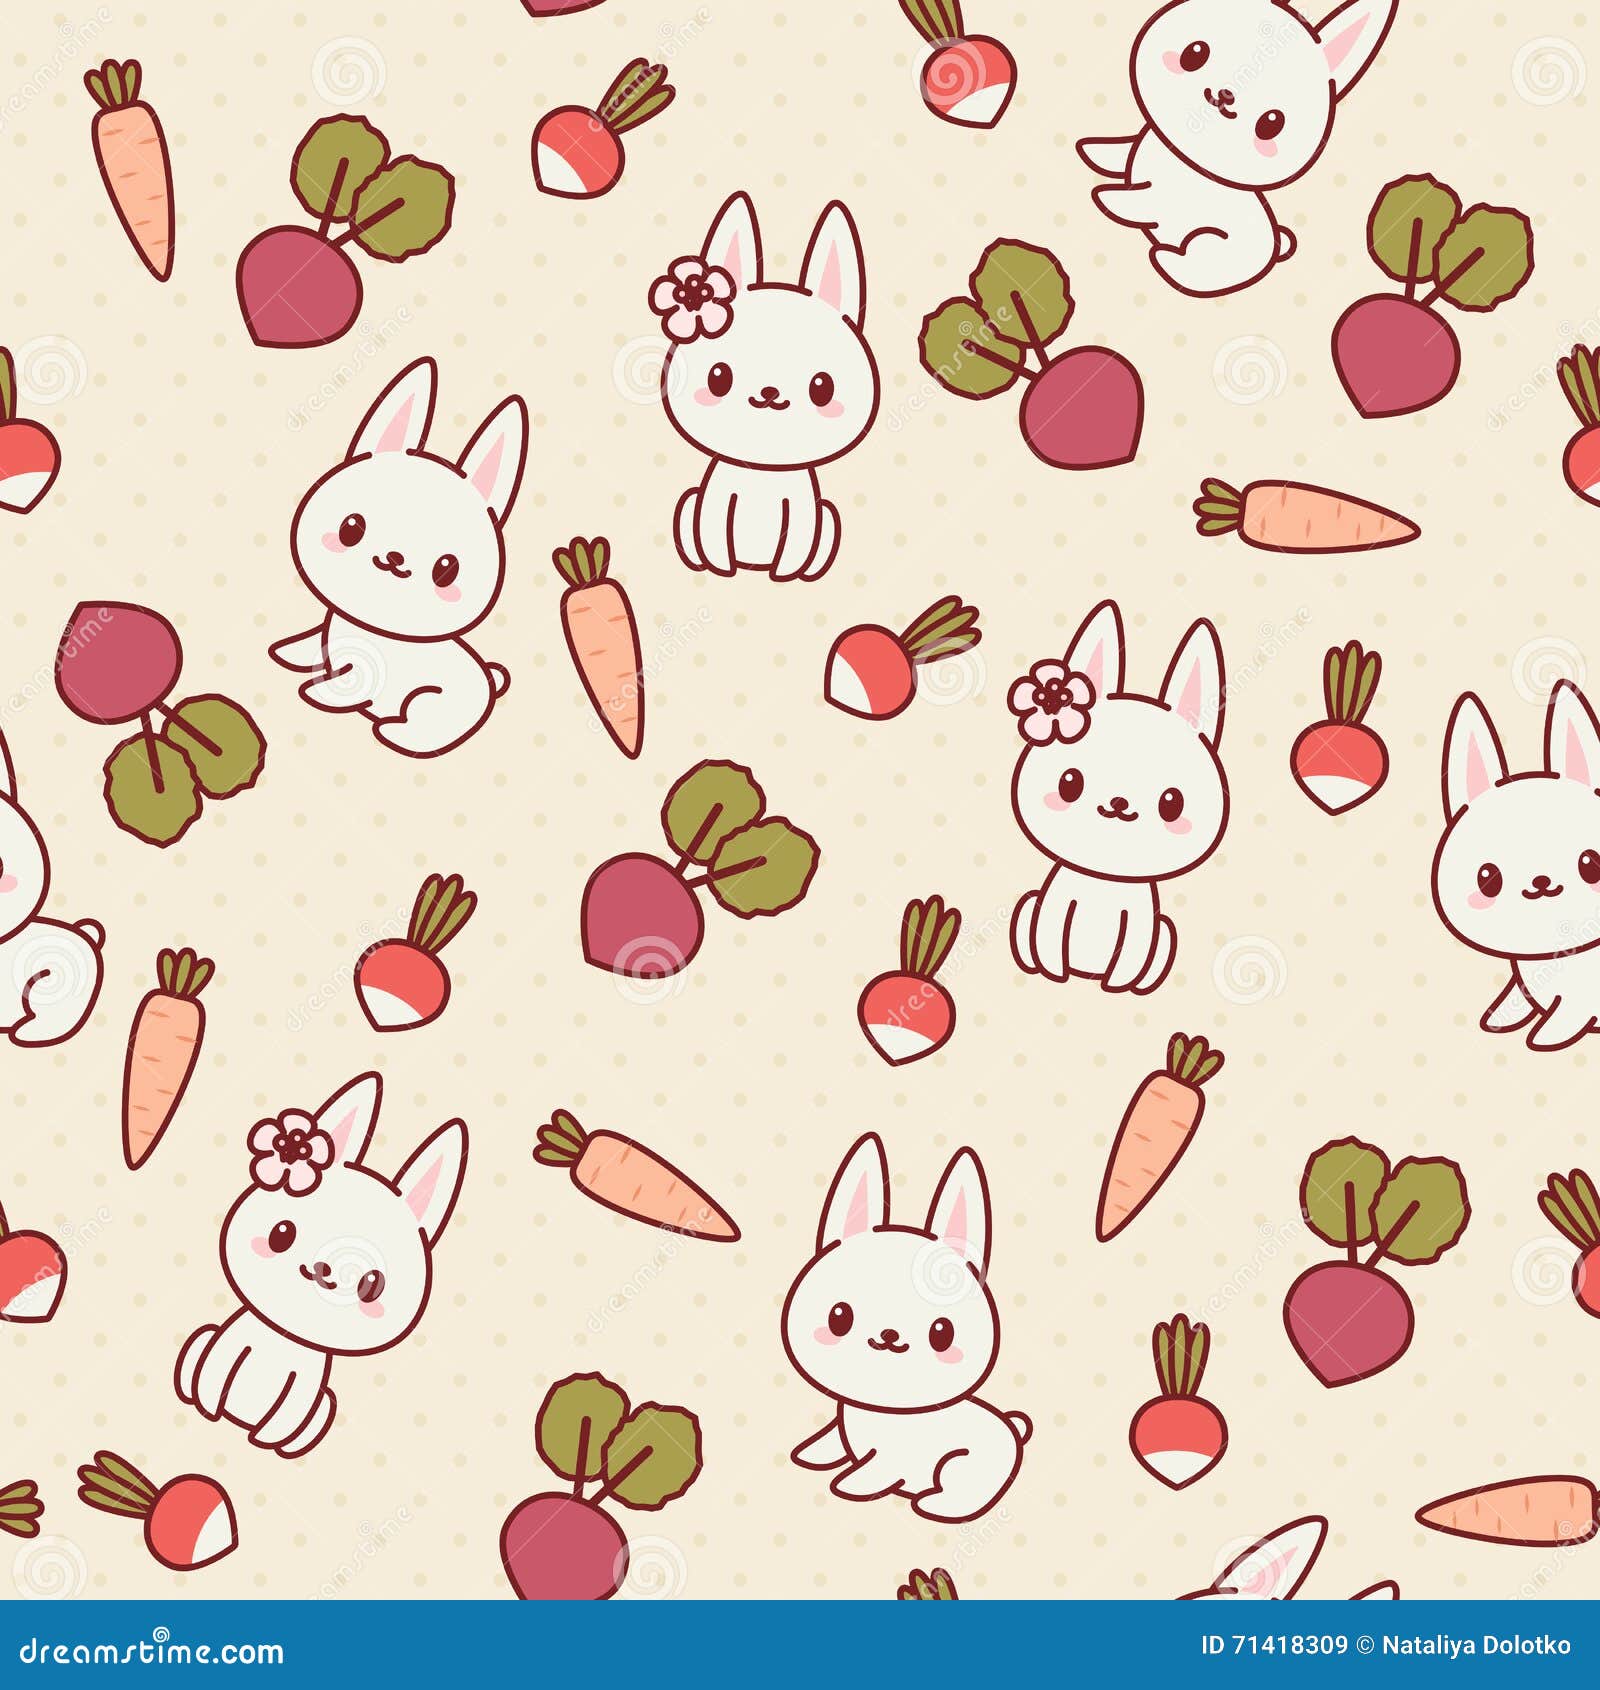 kawaii seamless pattern with bunnies and vegetables